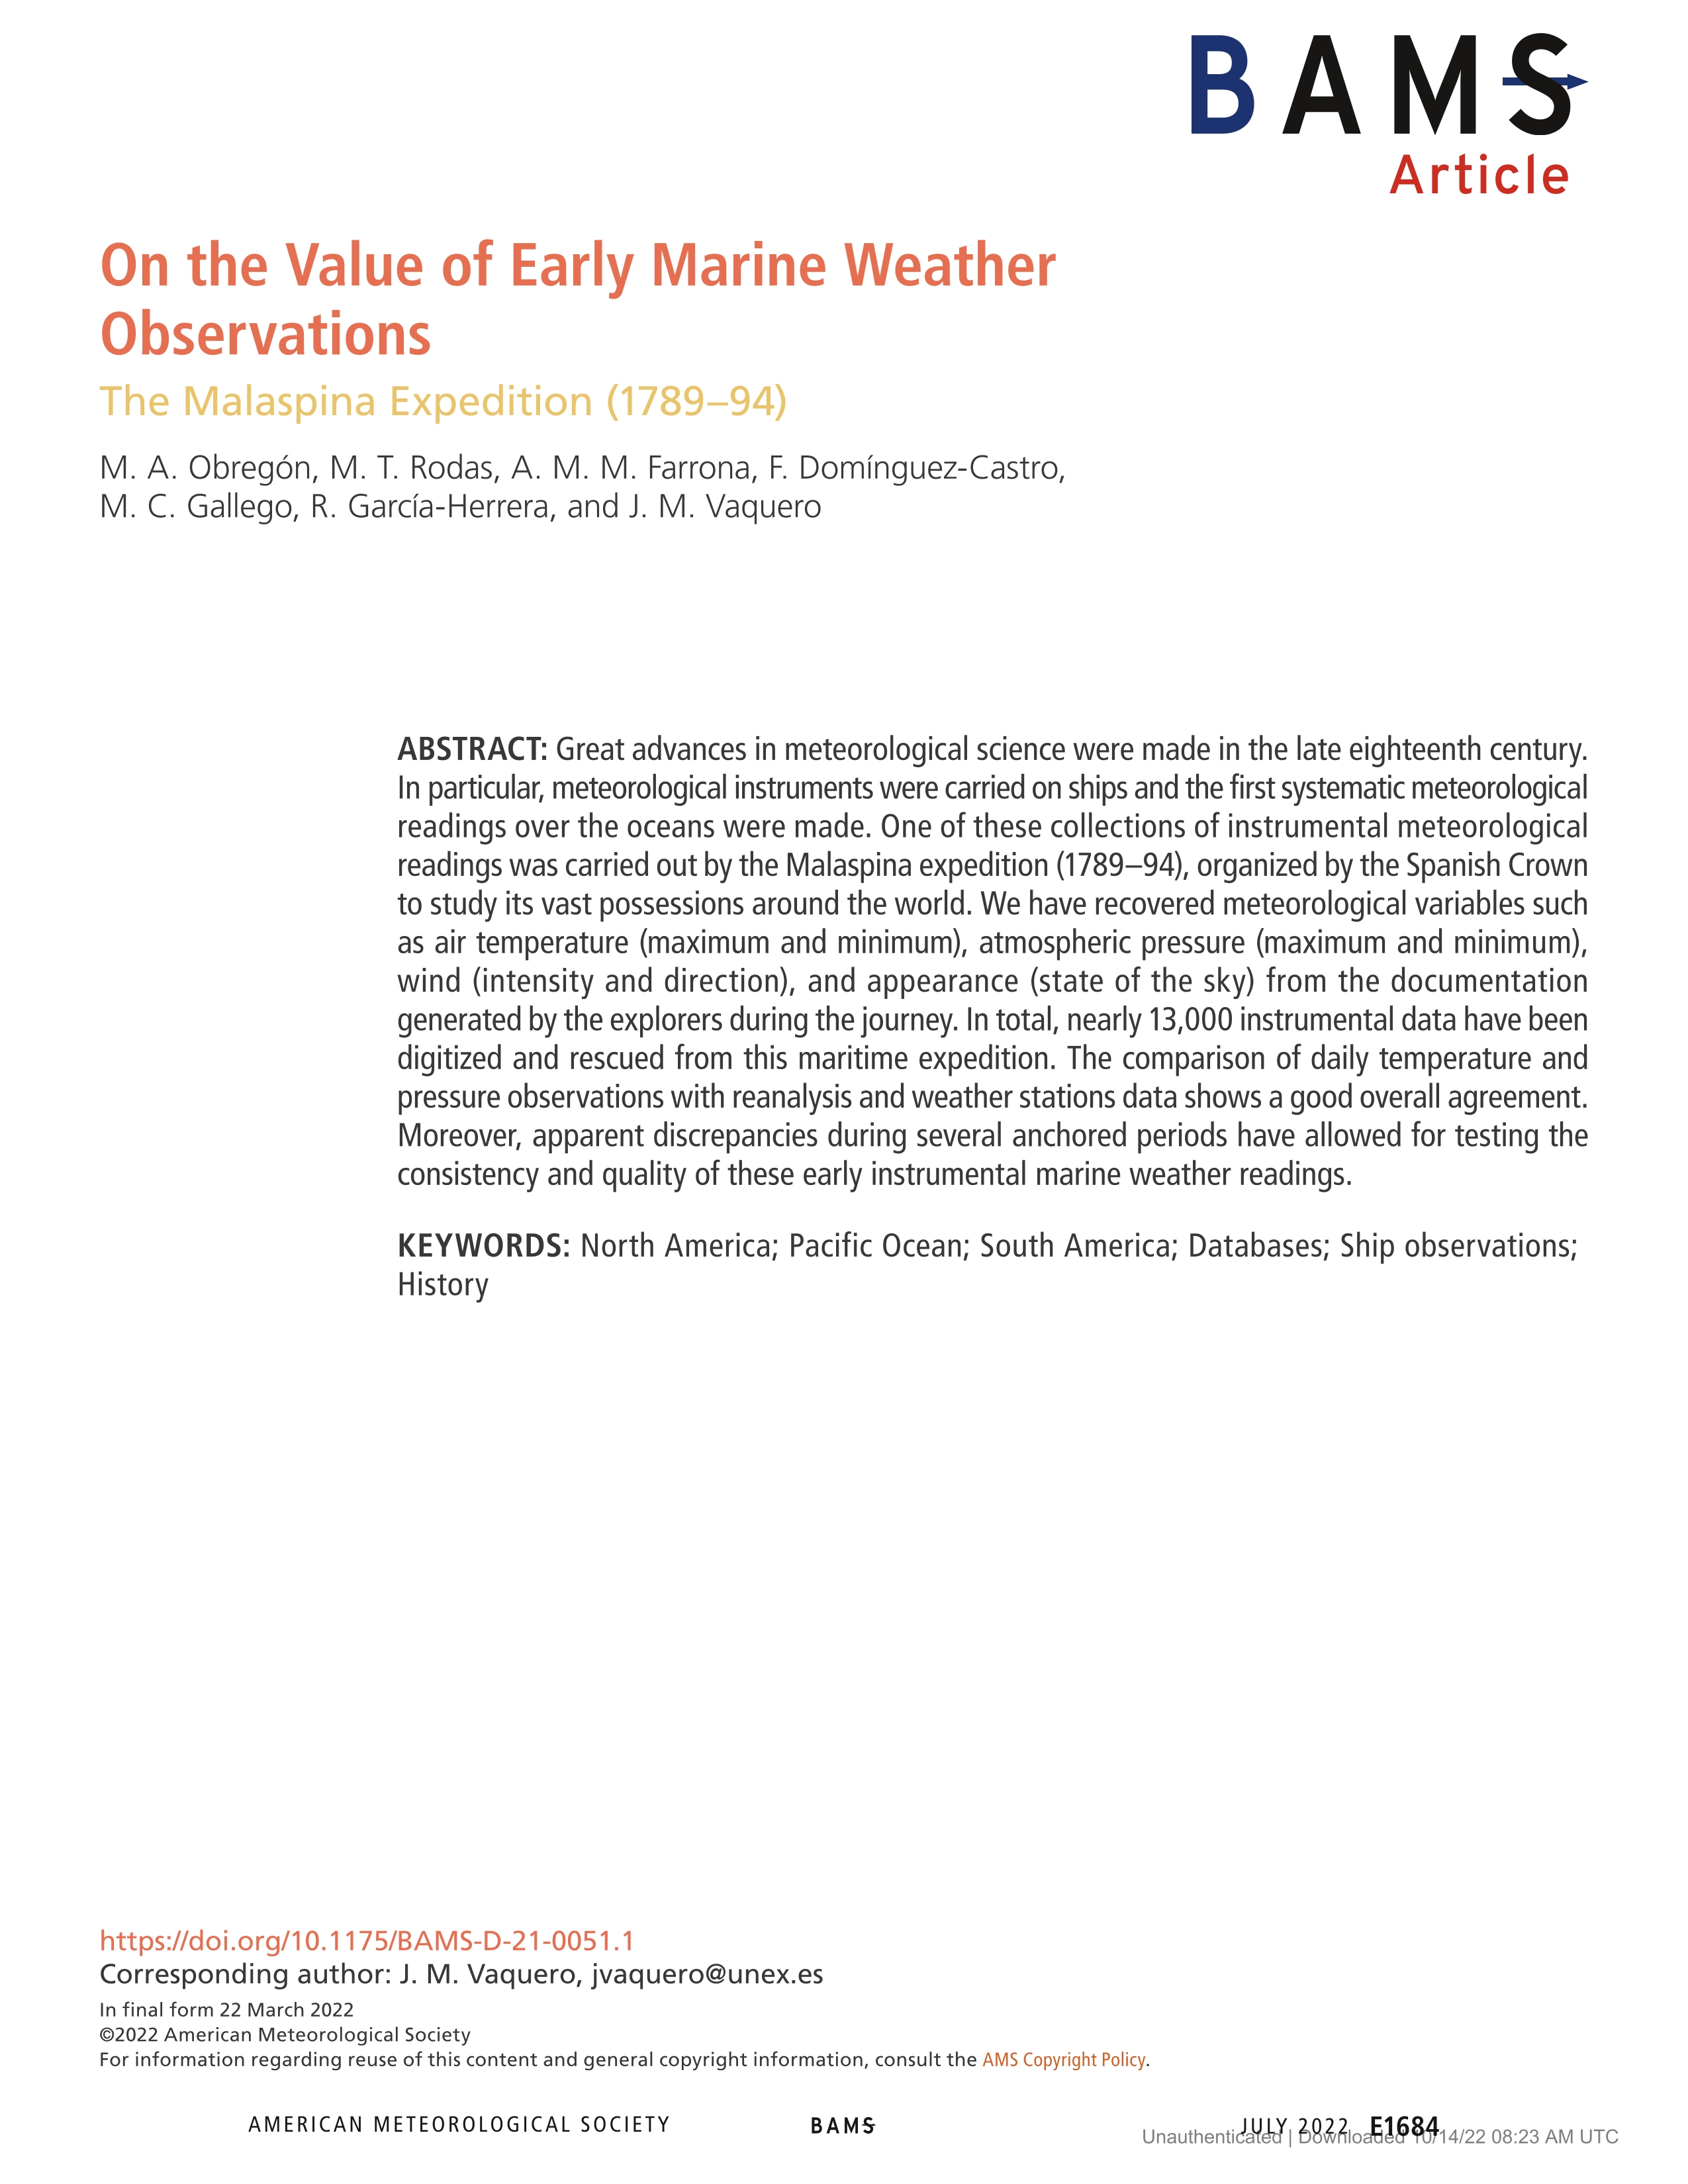 On the value of early marine weather observations: The Malaspina expedition (1789–94)